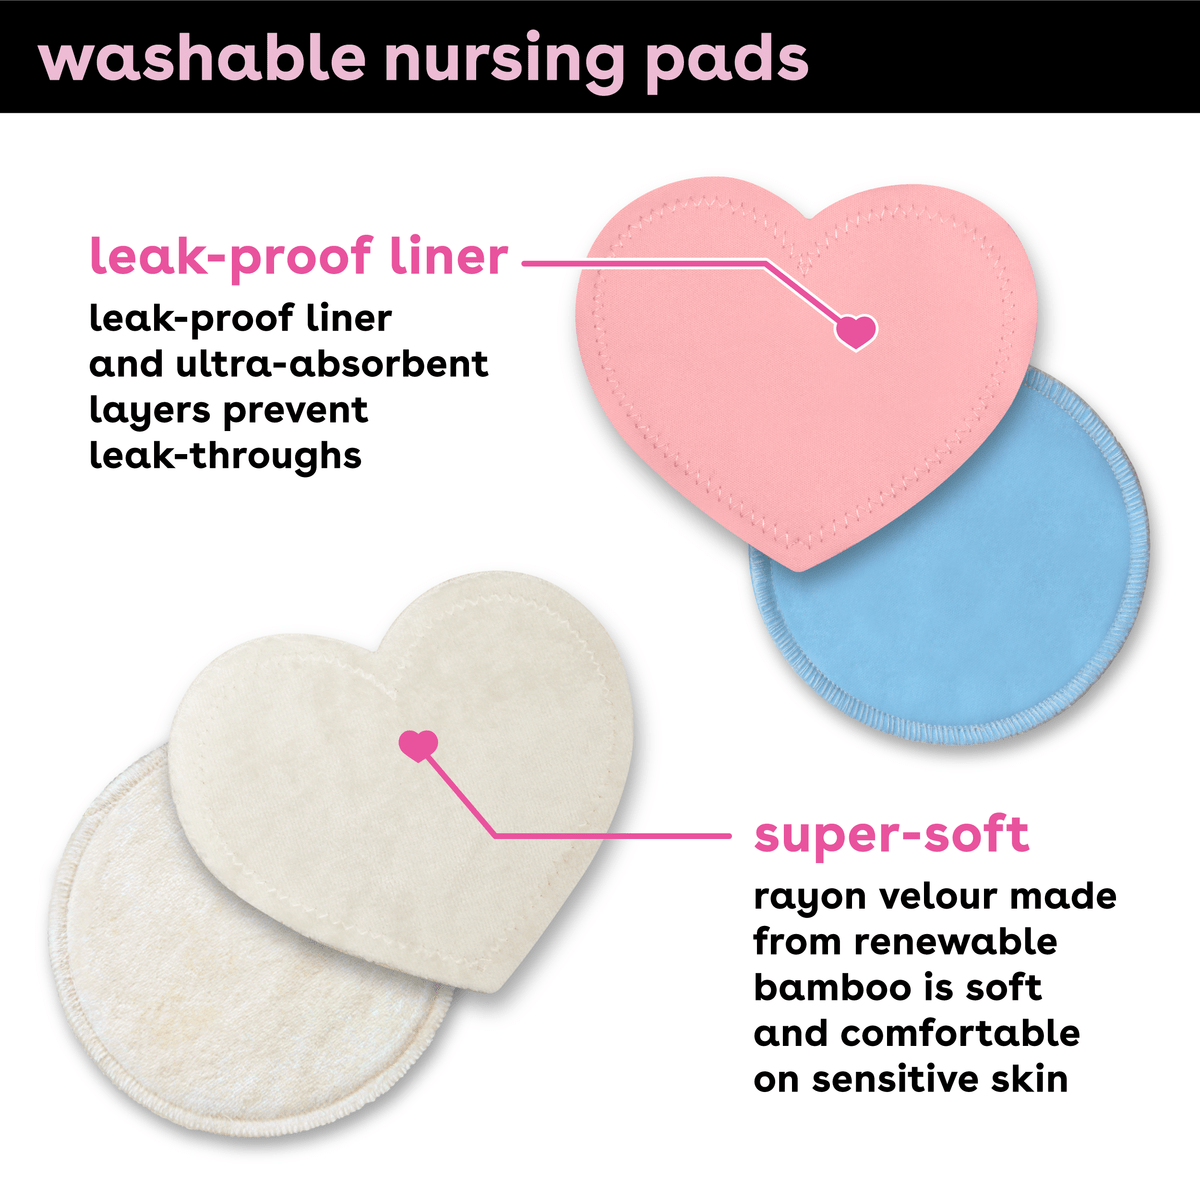 Reusable Nursing Pads for Breastfeeding, 10-Pack - 3 Layers Organic Bamboo Nursing Pads - Breastfeeding Pads - Washable Breast Pads - Natural Bamboo